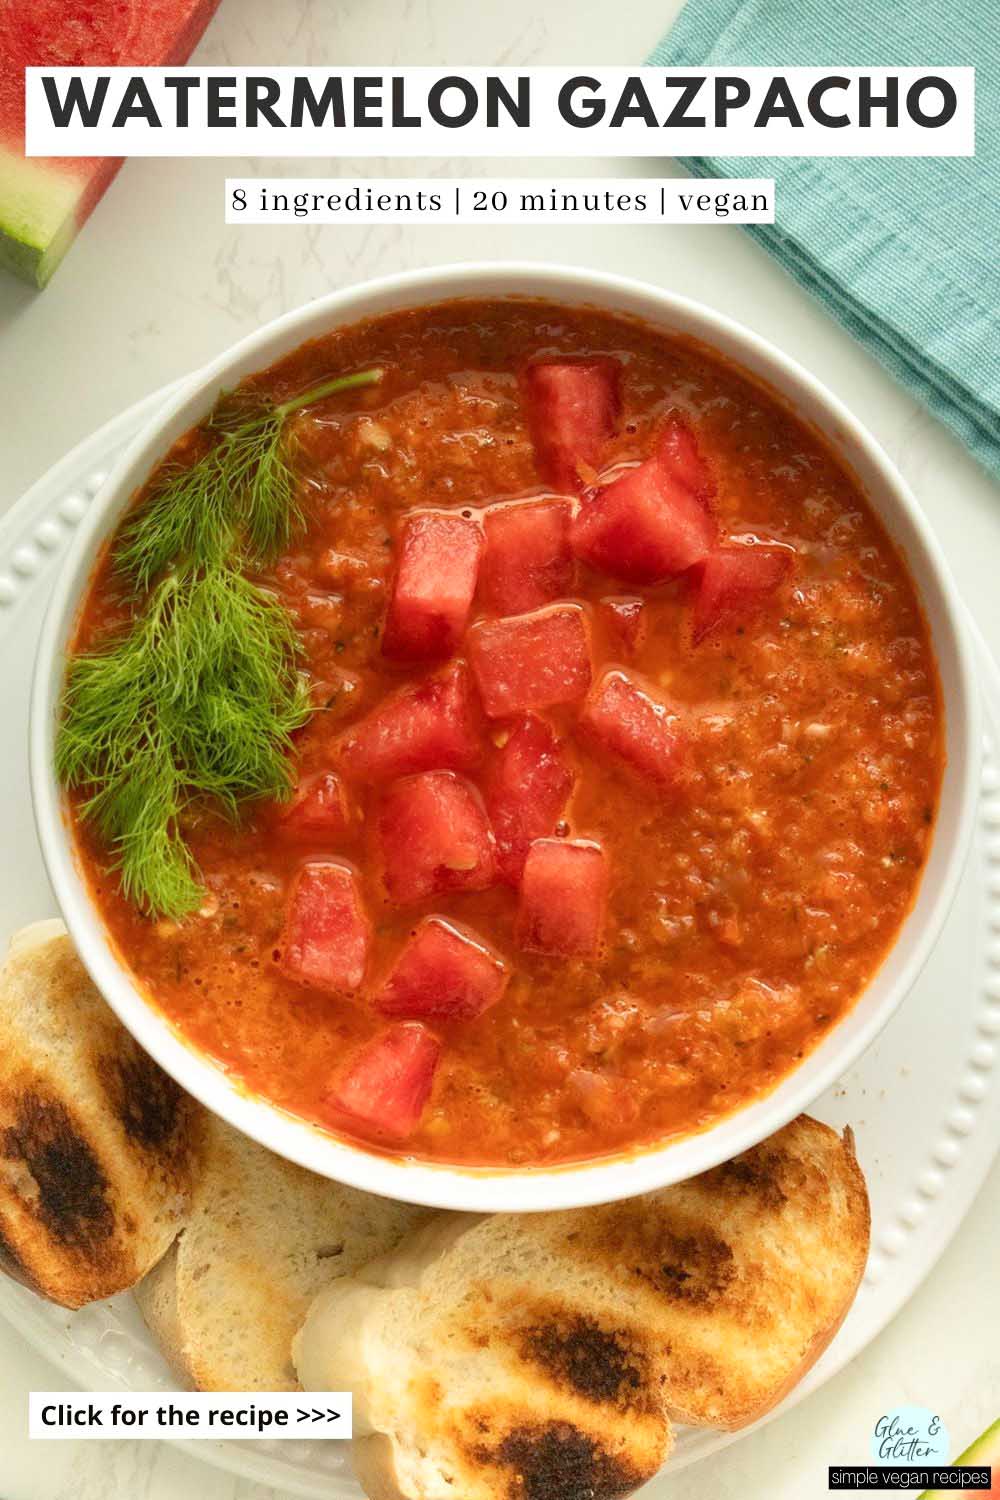 bowl of watermelon gazpacho topped with fennel leaves and chopped watermelon next to a side of toasted bread, text overlay